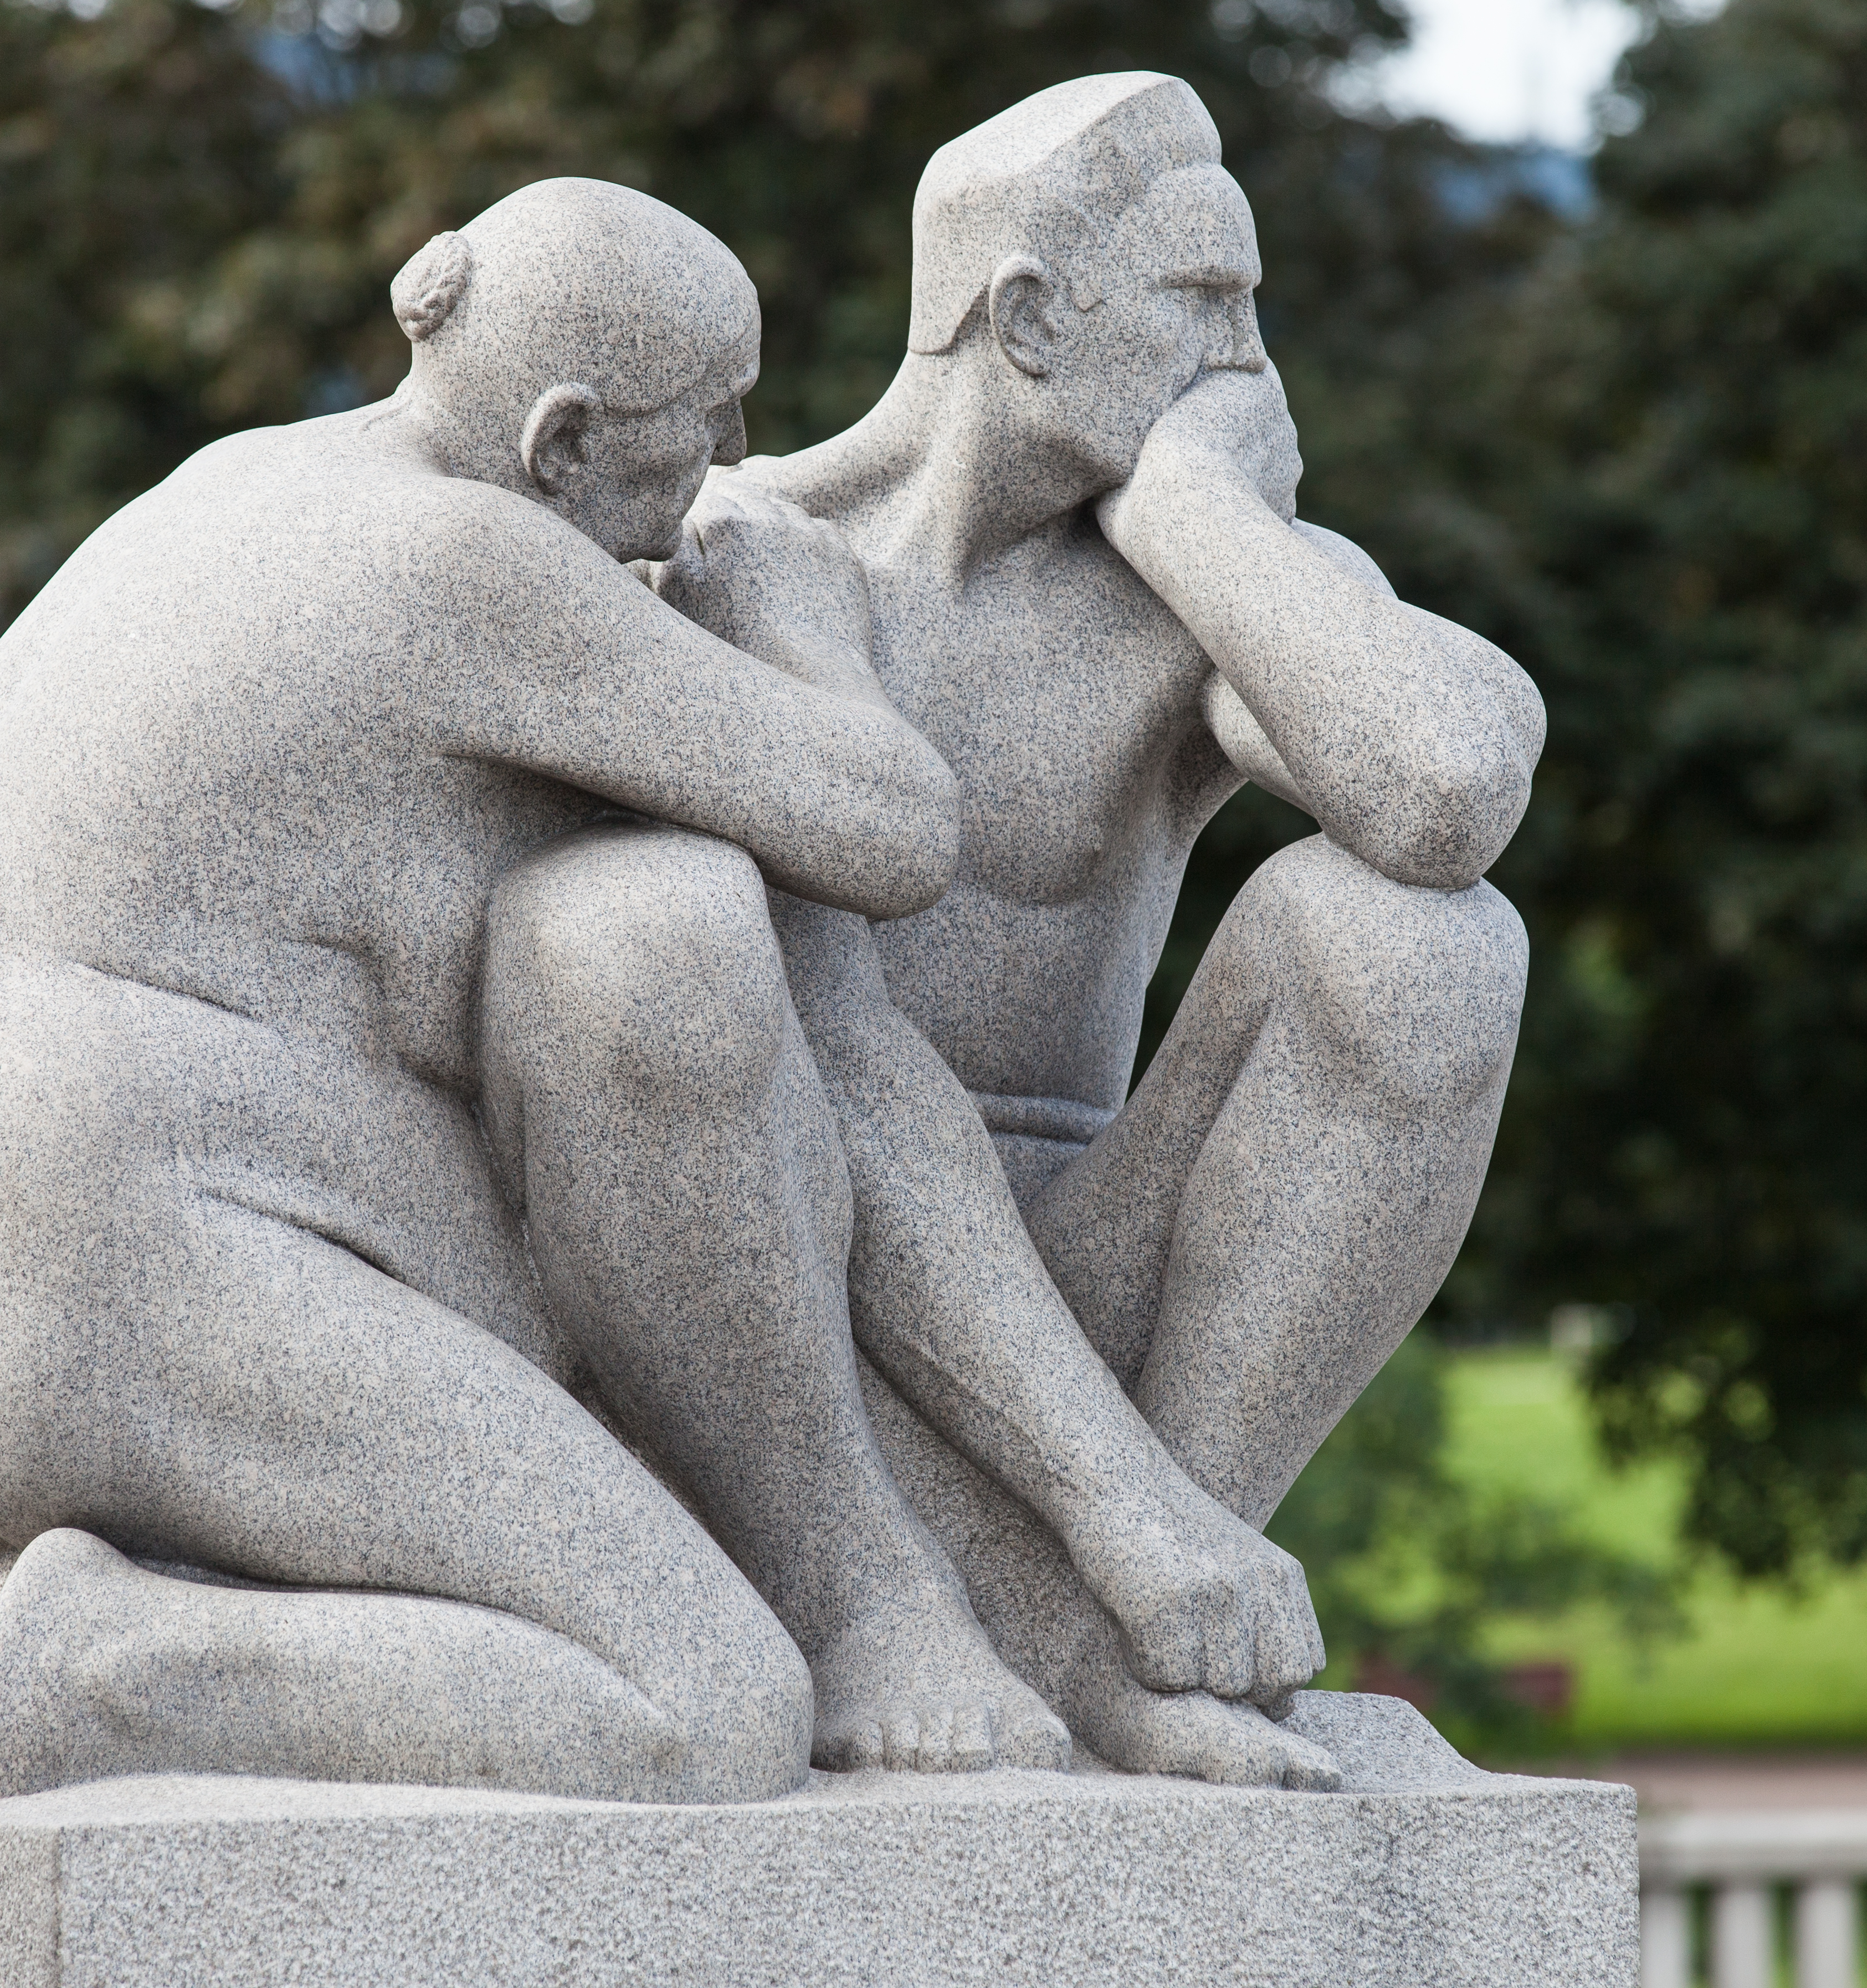 statues in Vigeland park in Oslo, Norway, June 2014, picture 33